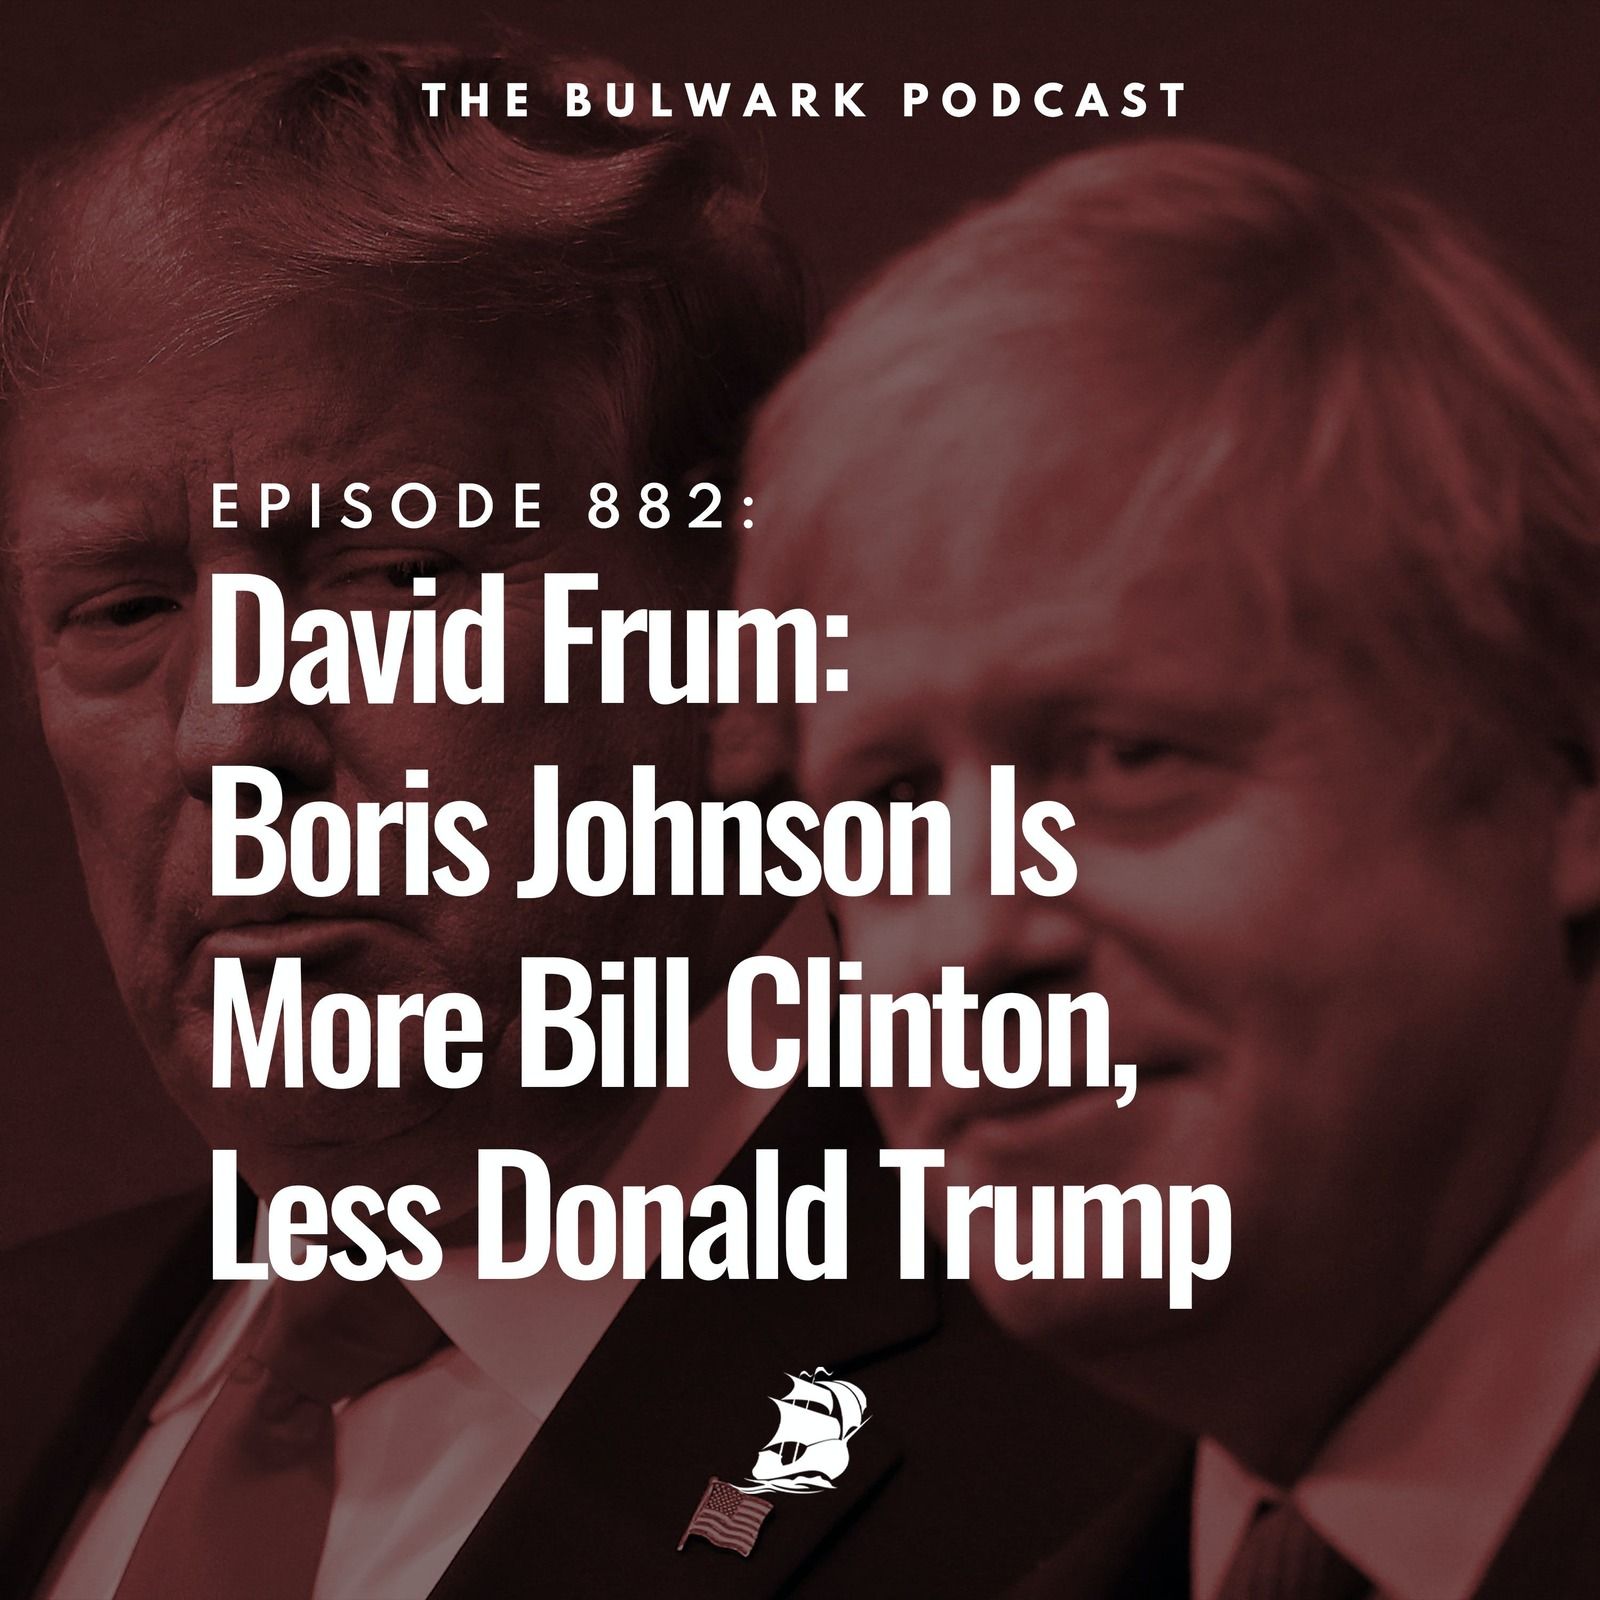 Boris Johnson Is More Bill Clinton, Less Donald Trump (with David Frum) by The Bulwark Podcast